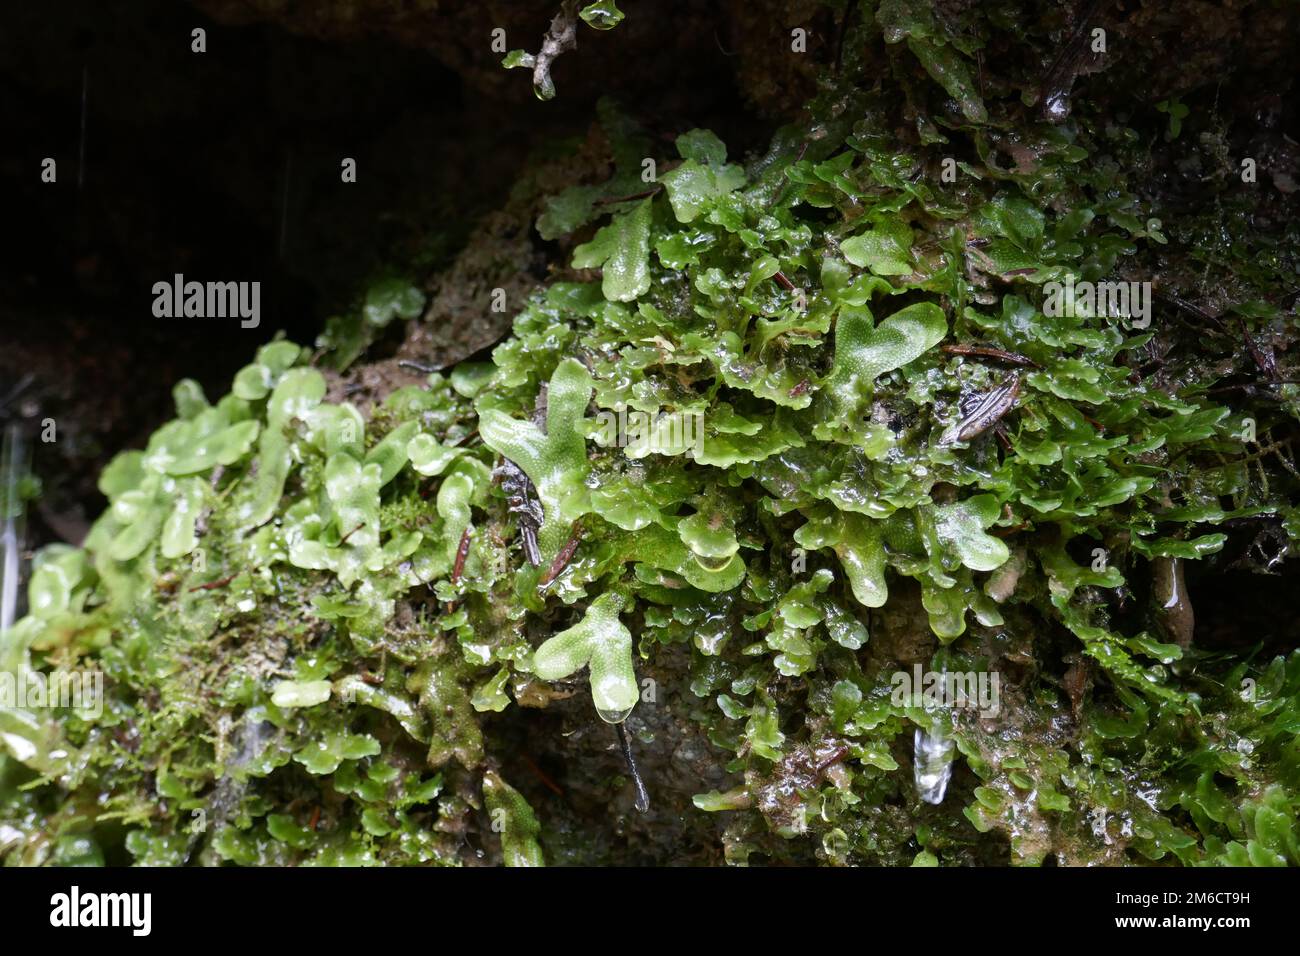 Liverwort primitive plant with water dripping off of leaves Stock Photo